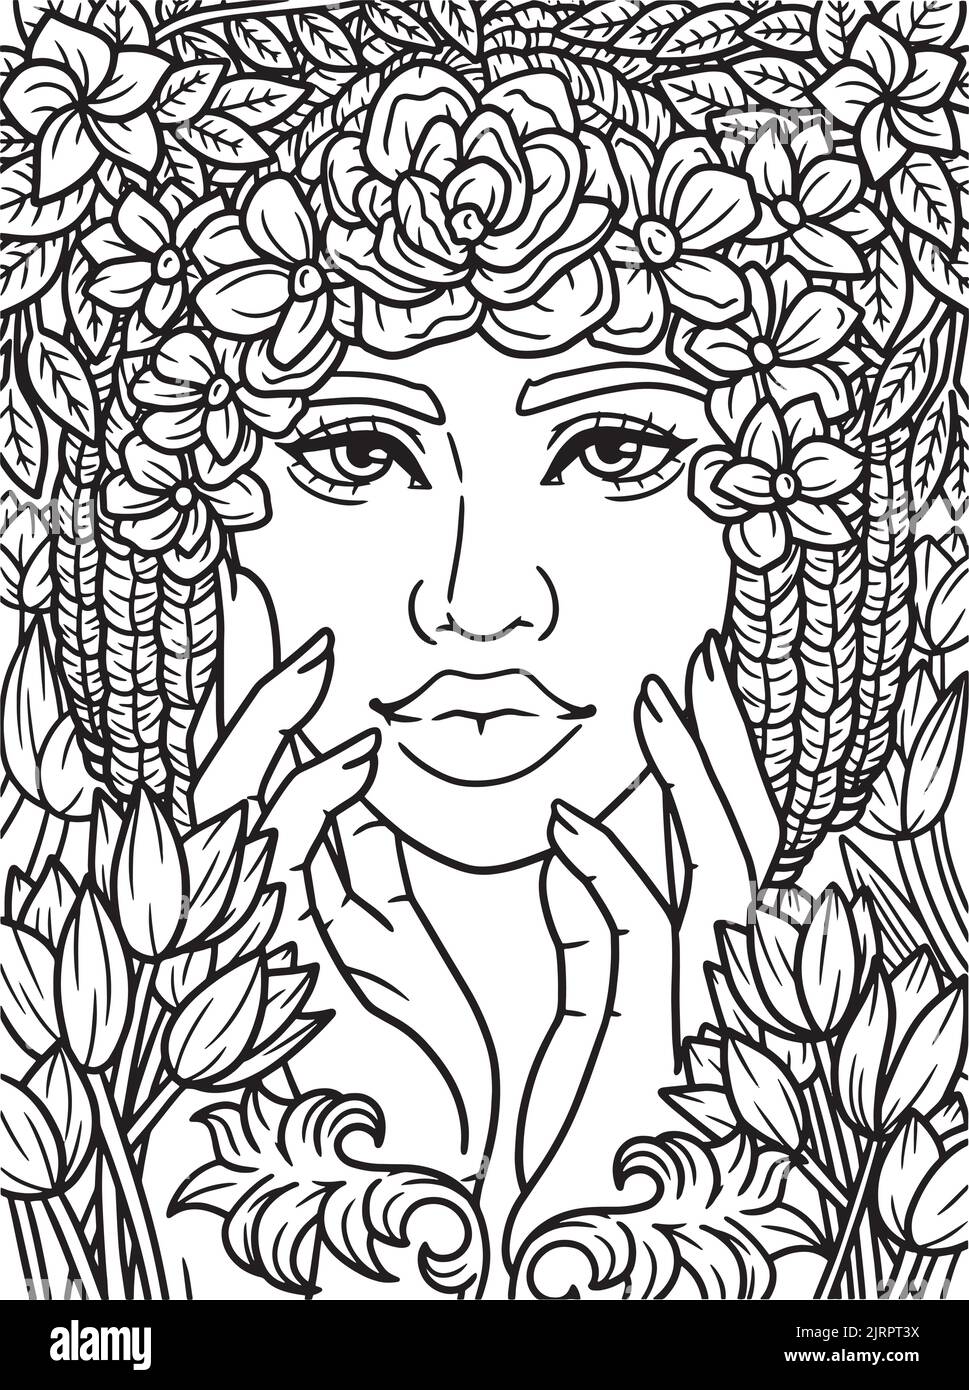 Afro American Flower Girl Coloring Page for Kids Stock Vector